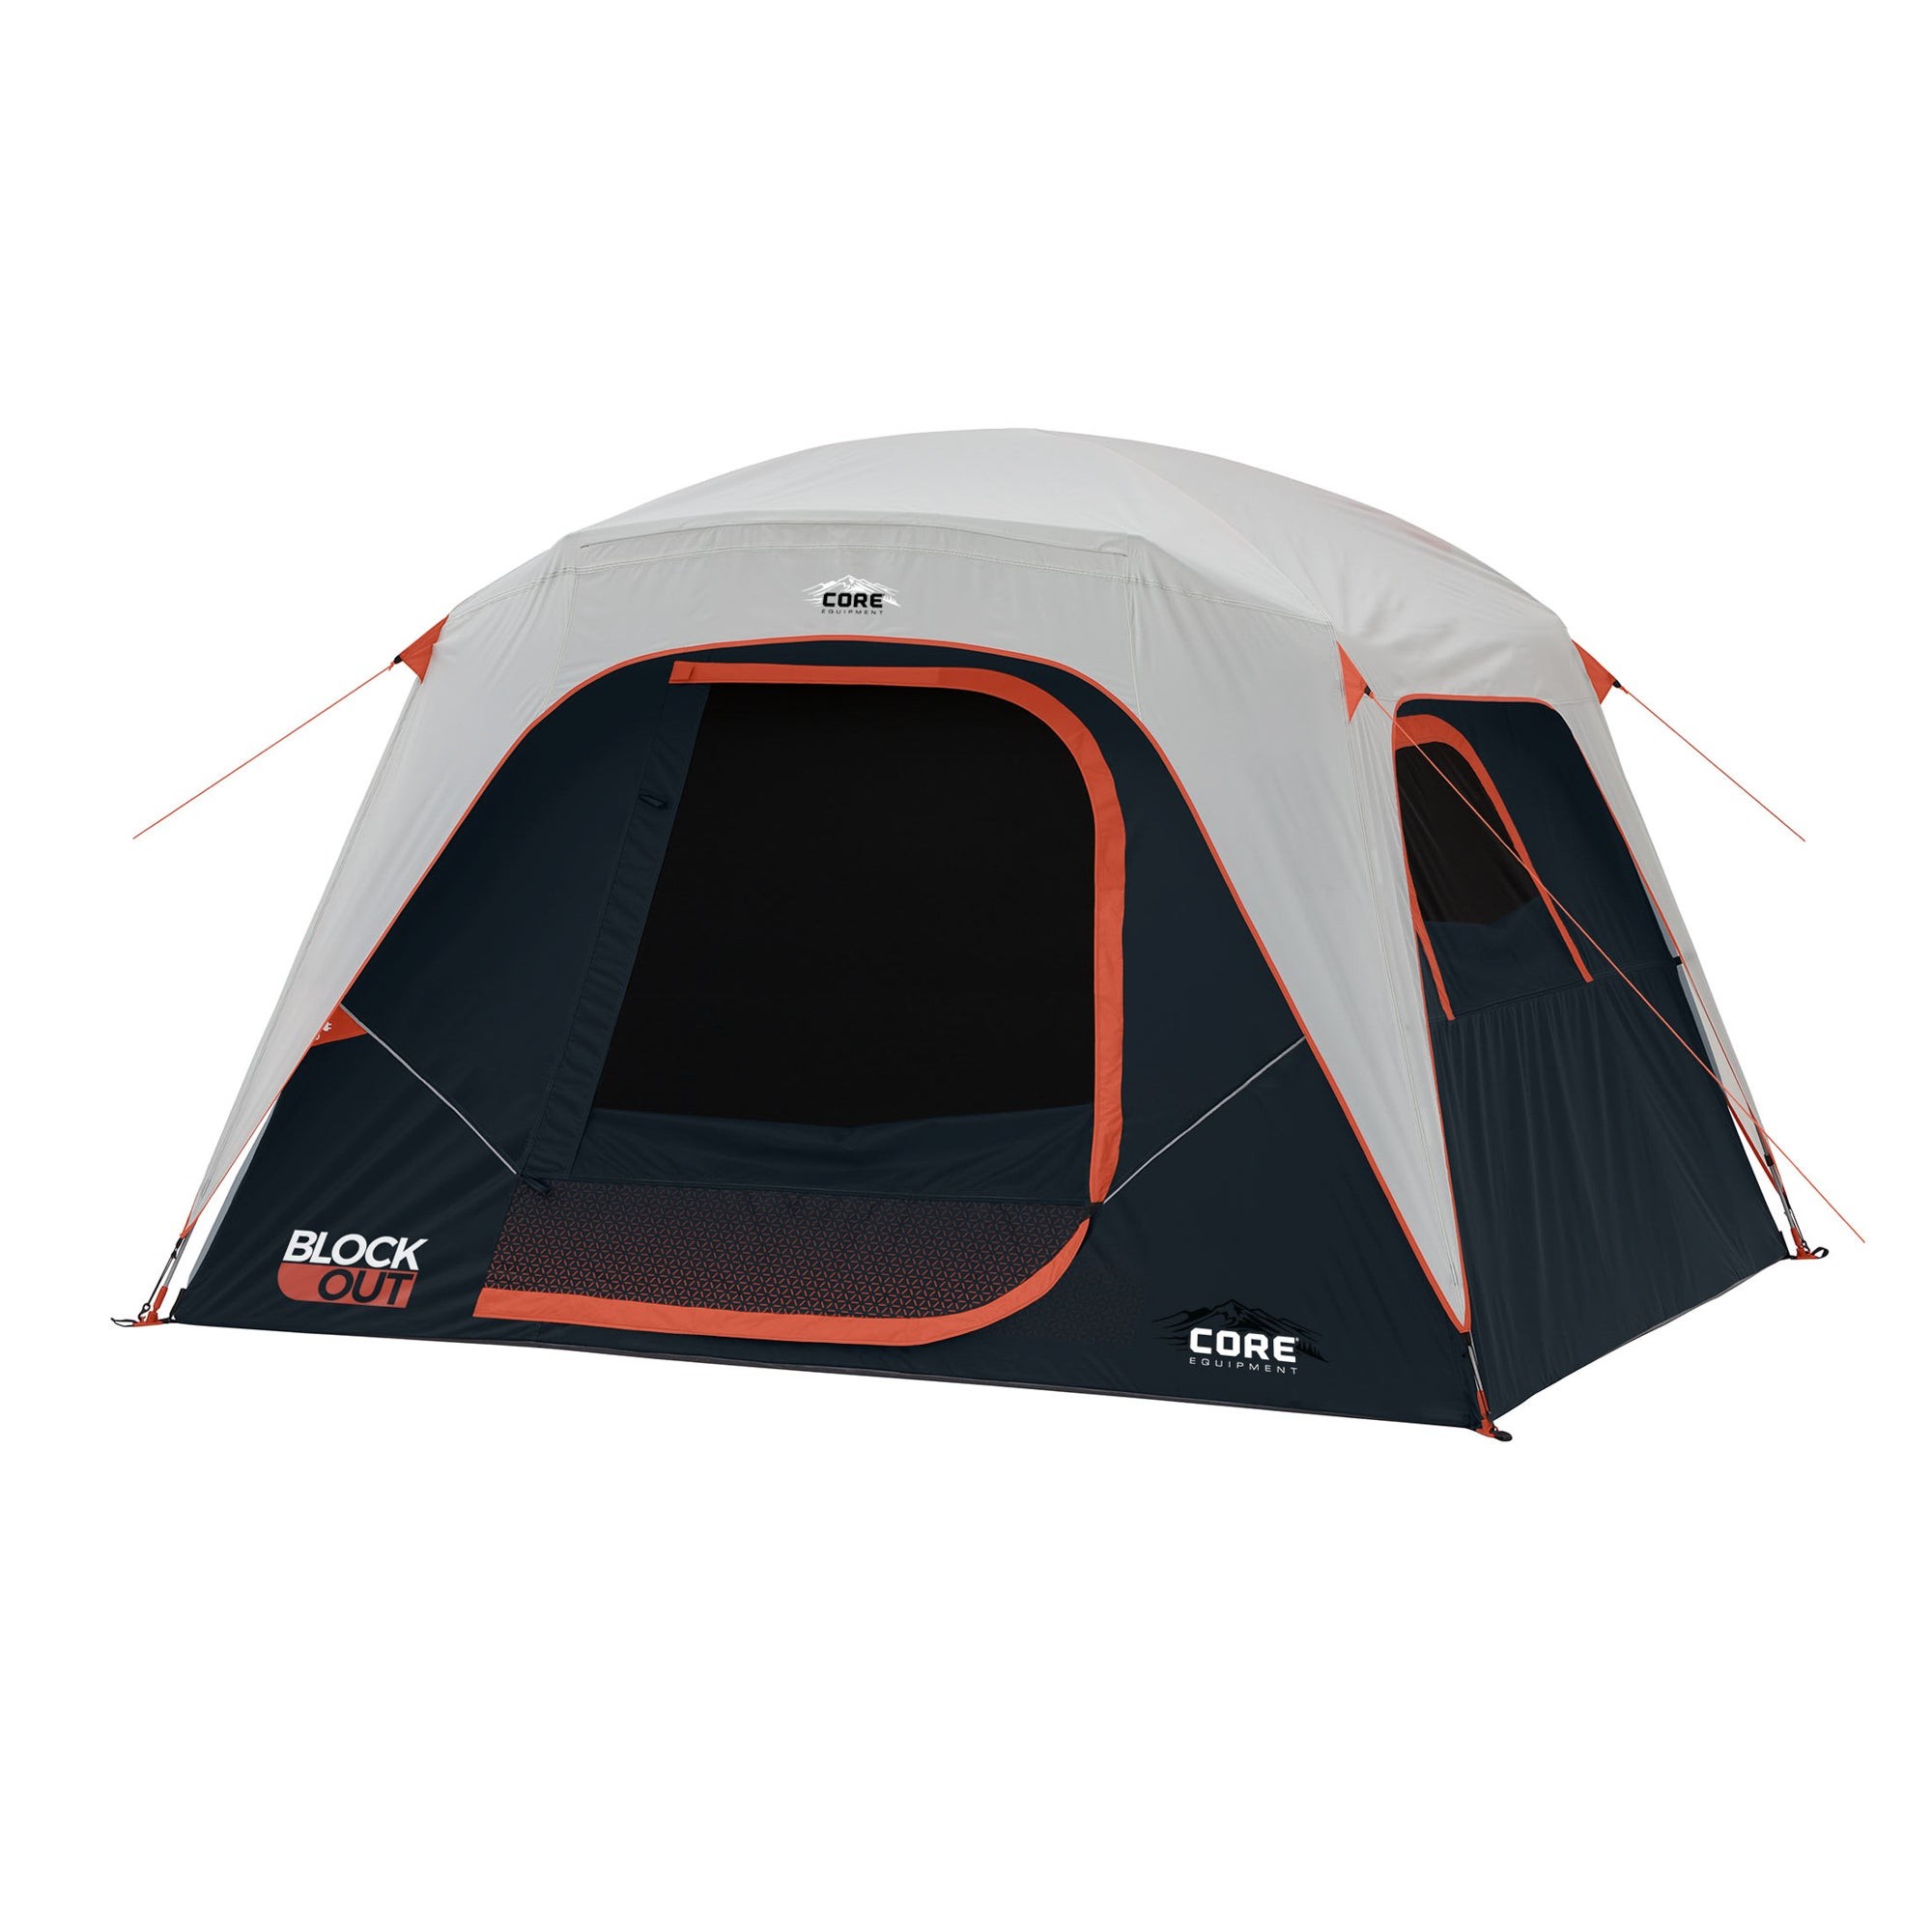 6 Person Blockout Dome Tent - 10ft x 9ft